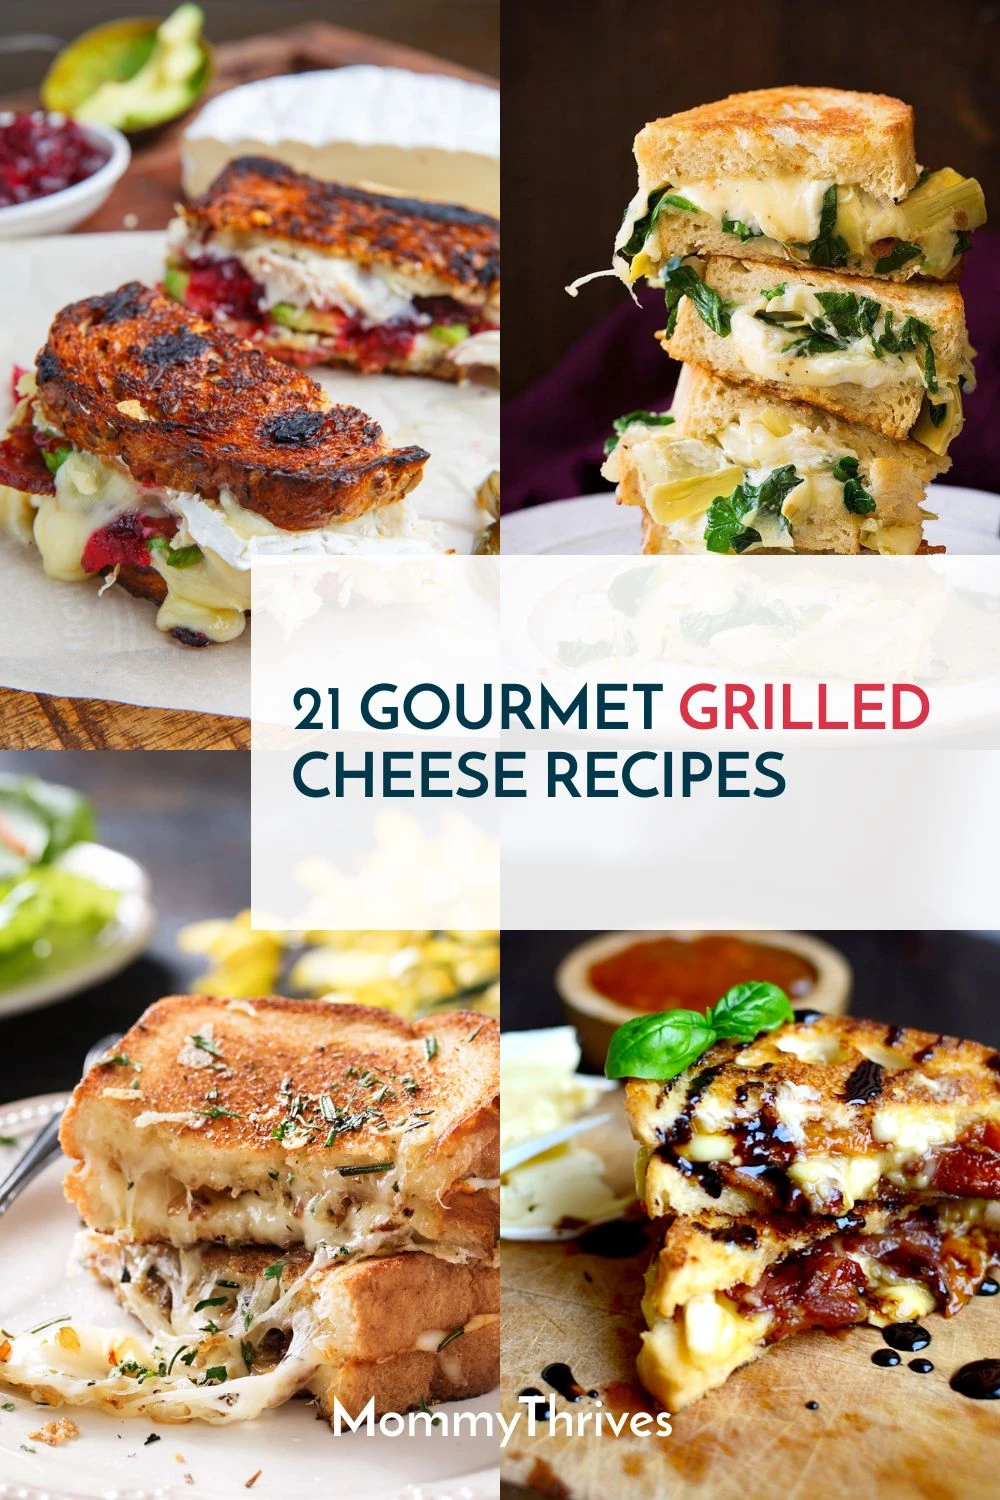 Delicious Grilled Cheese Sandwiches - Gourmet Grilled Cheese Sandwiches - Fancy Grilled Cheese Sandwich Recipes